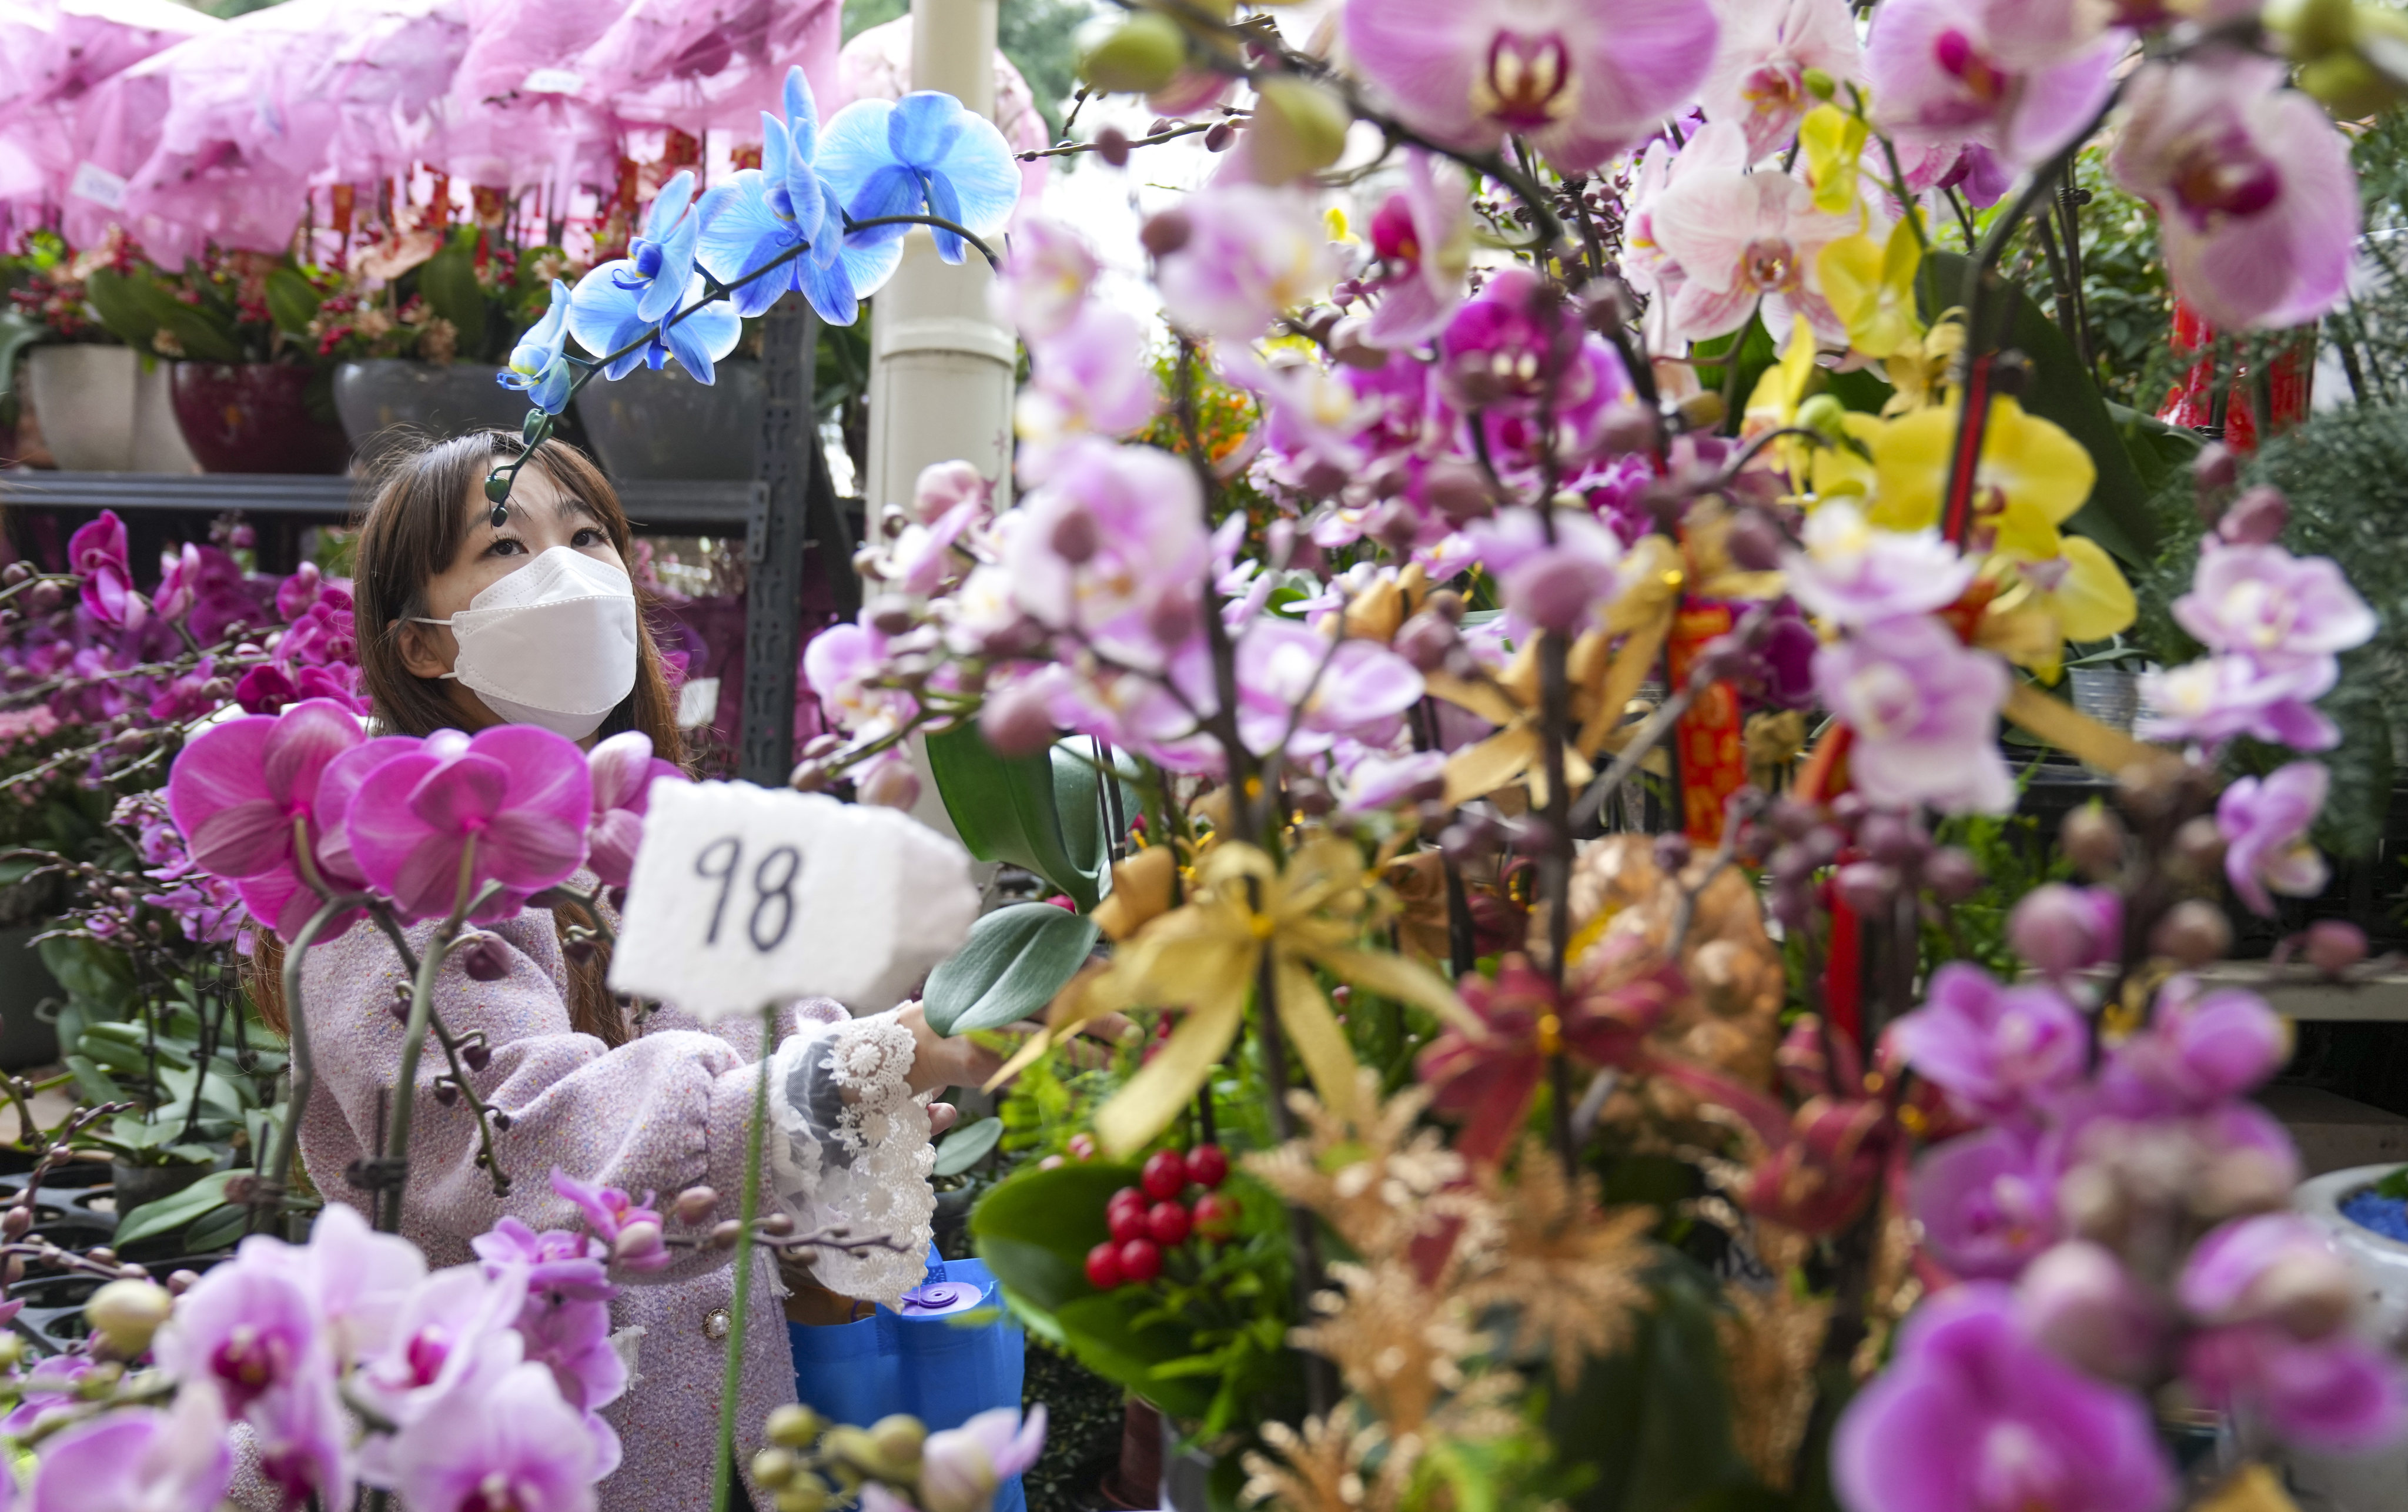 A view of the Flower Market in Prince Edward on January 9, 2023, before the fixed penalty for shopfront extension was raised. Photo: Sam Tsang

